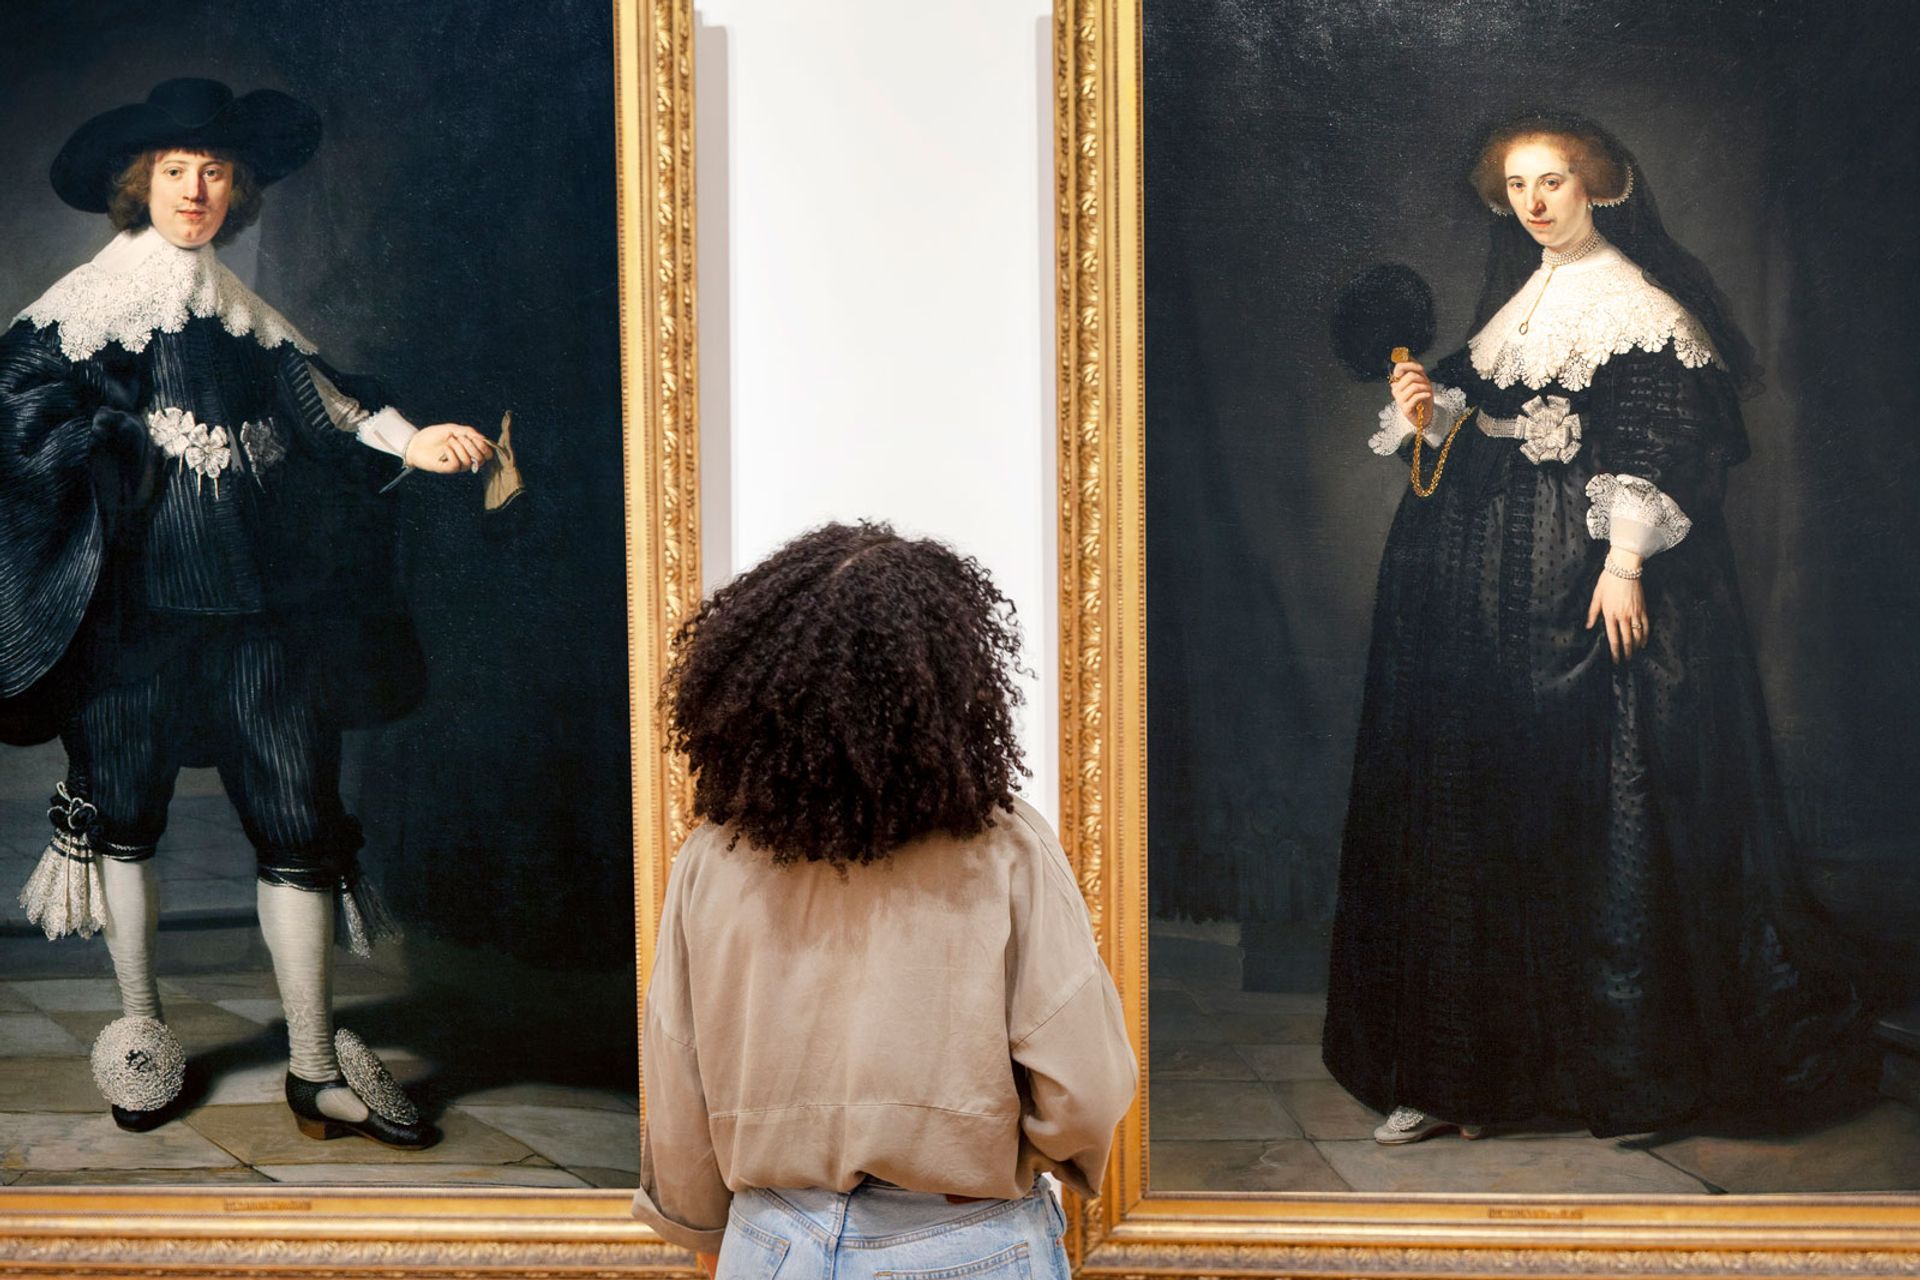 Installation view of the Slavery exhibition showing Rembrandt's portraits of Marten Soolmans and Oopjen Coppit (both 1634) Photo: Rijksmuseum